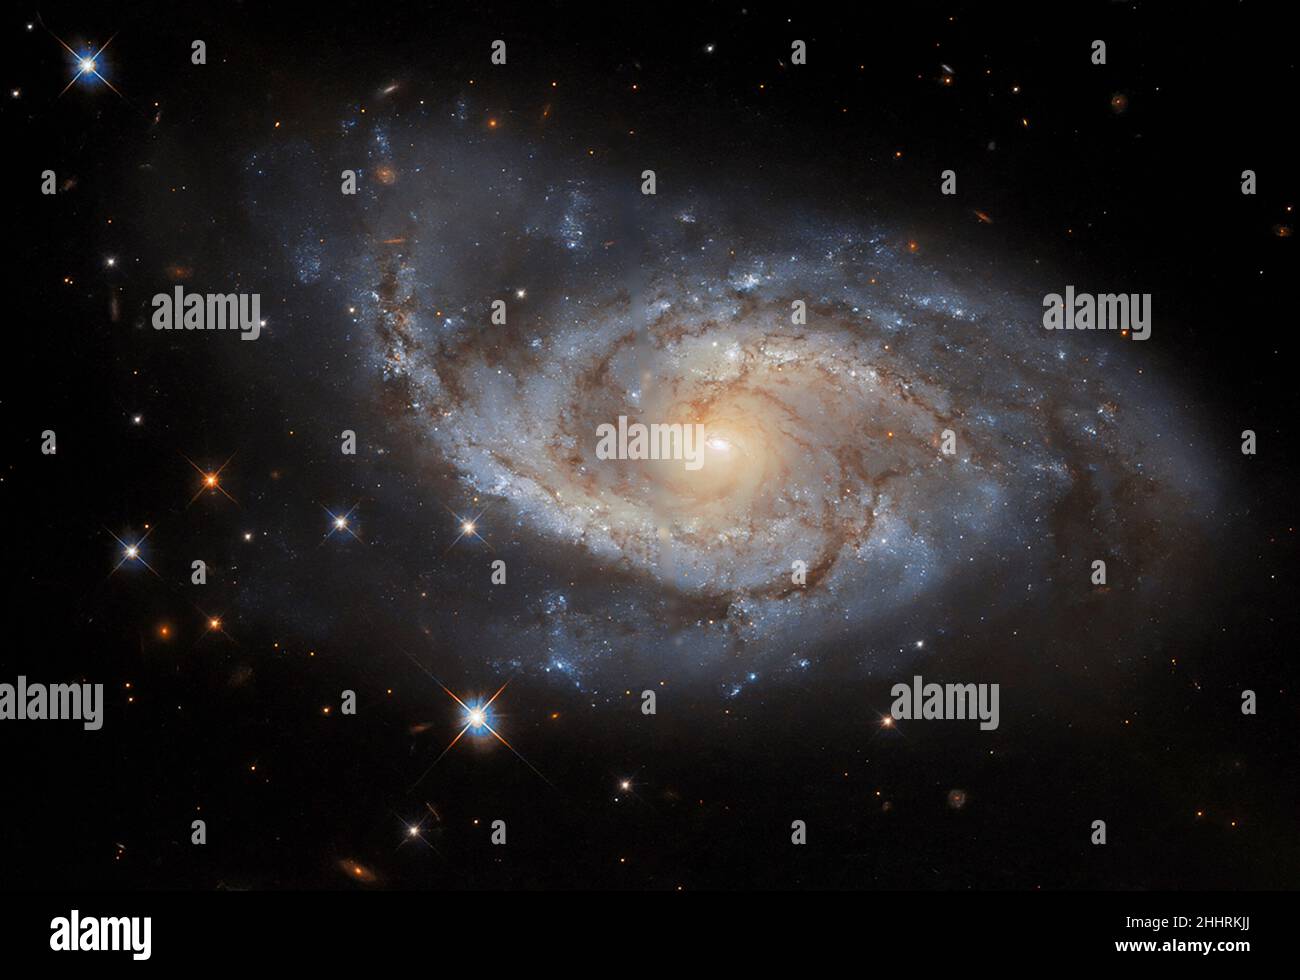 The spiral arms of the galaxy NGC 3318 are lazily draped across this image from the NASA/ESA Hubble Space Telescope released on January 21, 2022. This spiral galaxy lies in the constellation Vela and is roughly 115 million light-years away from Earth. Vela was originally part of a far larger constellation, known as Argo Navis after the fabled ship Argo from Greek mythology, but this unwieldy constellation proved to be impractically large. Argo Navis was split into three separate parts called Carina, Puppis, and Vela â each named after part of the Argo. As befits a galaxy in a nautically insp Stock Photo